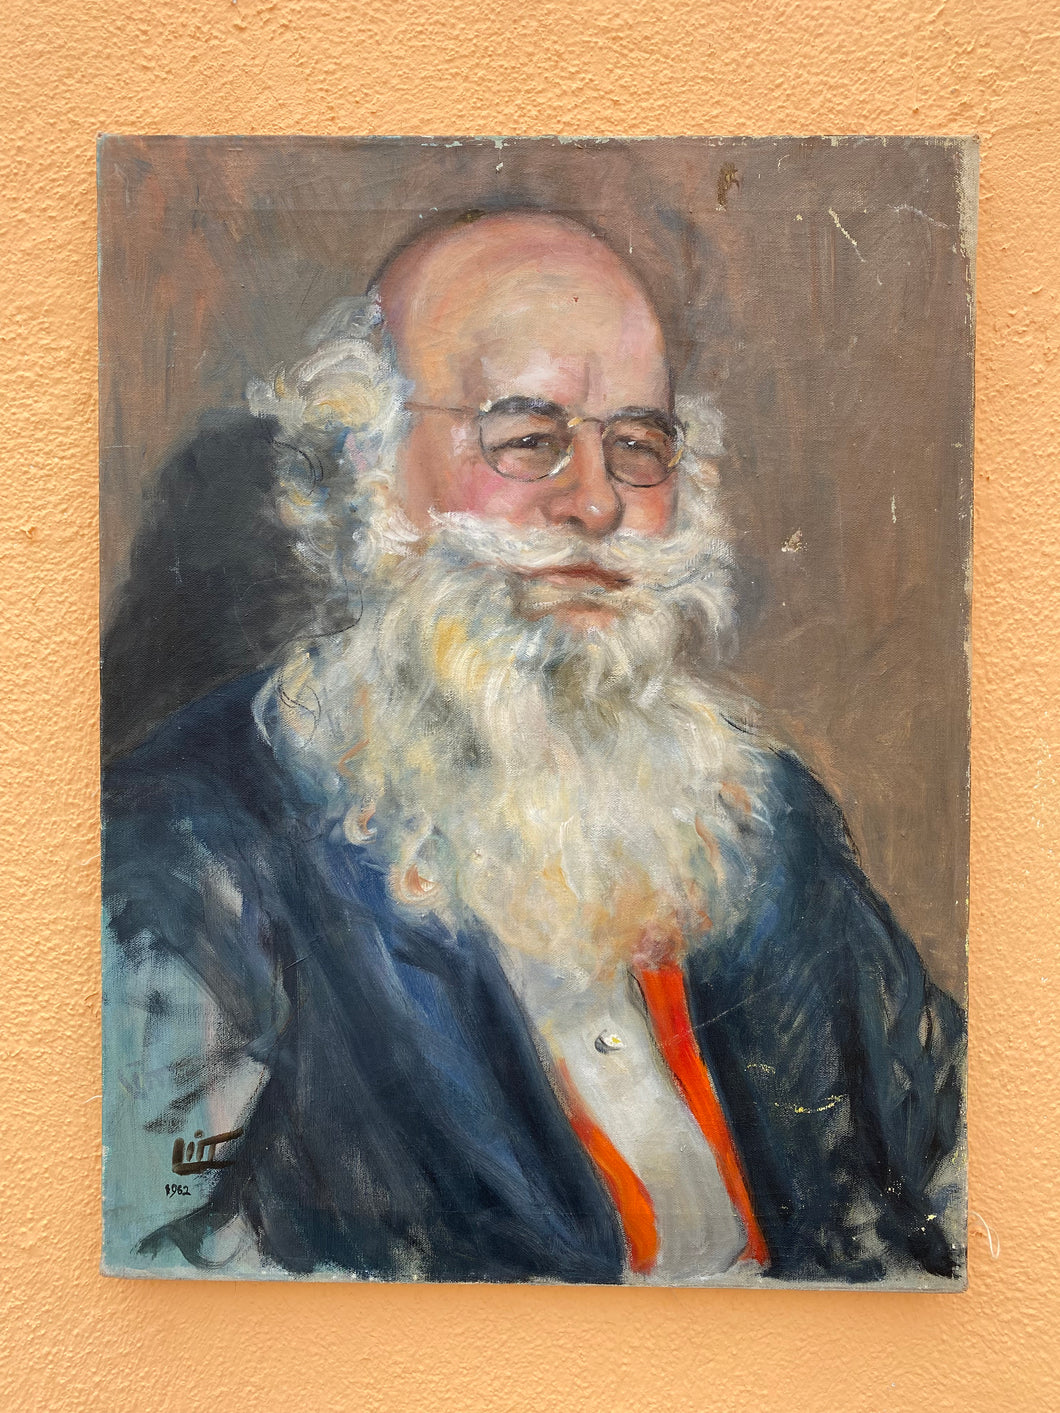 Vintage Painting of Man with Beard